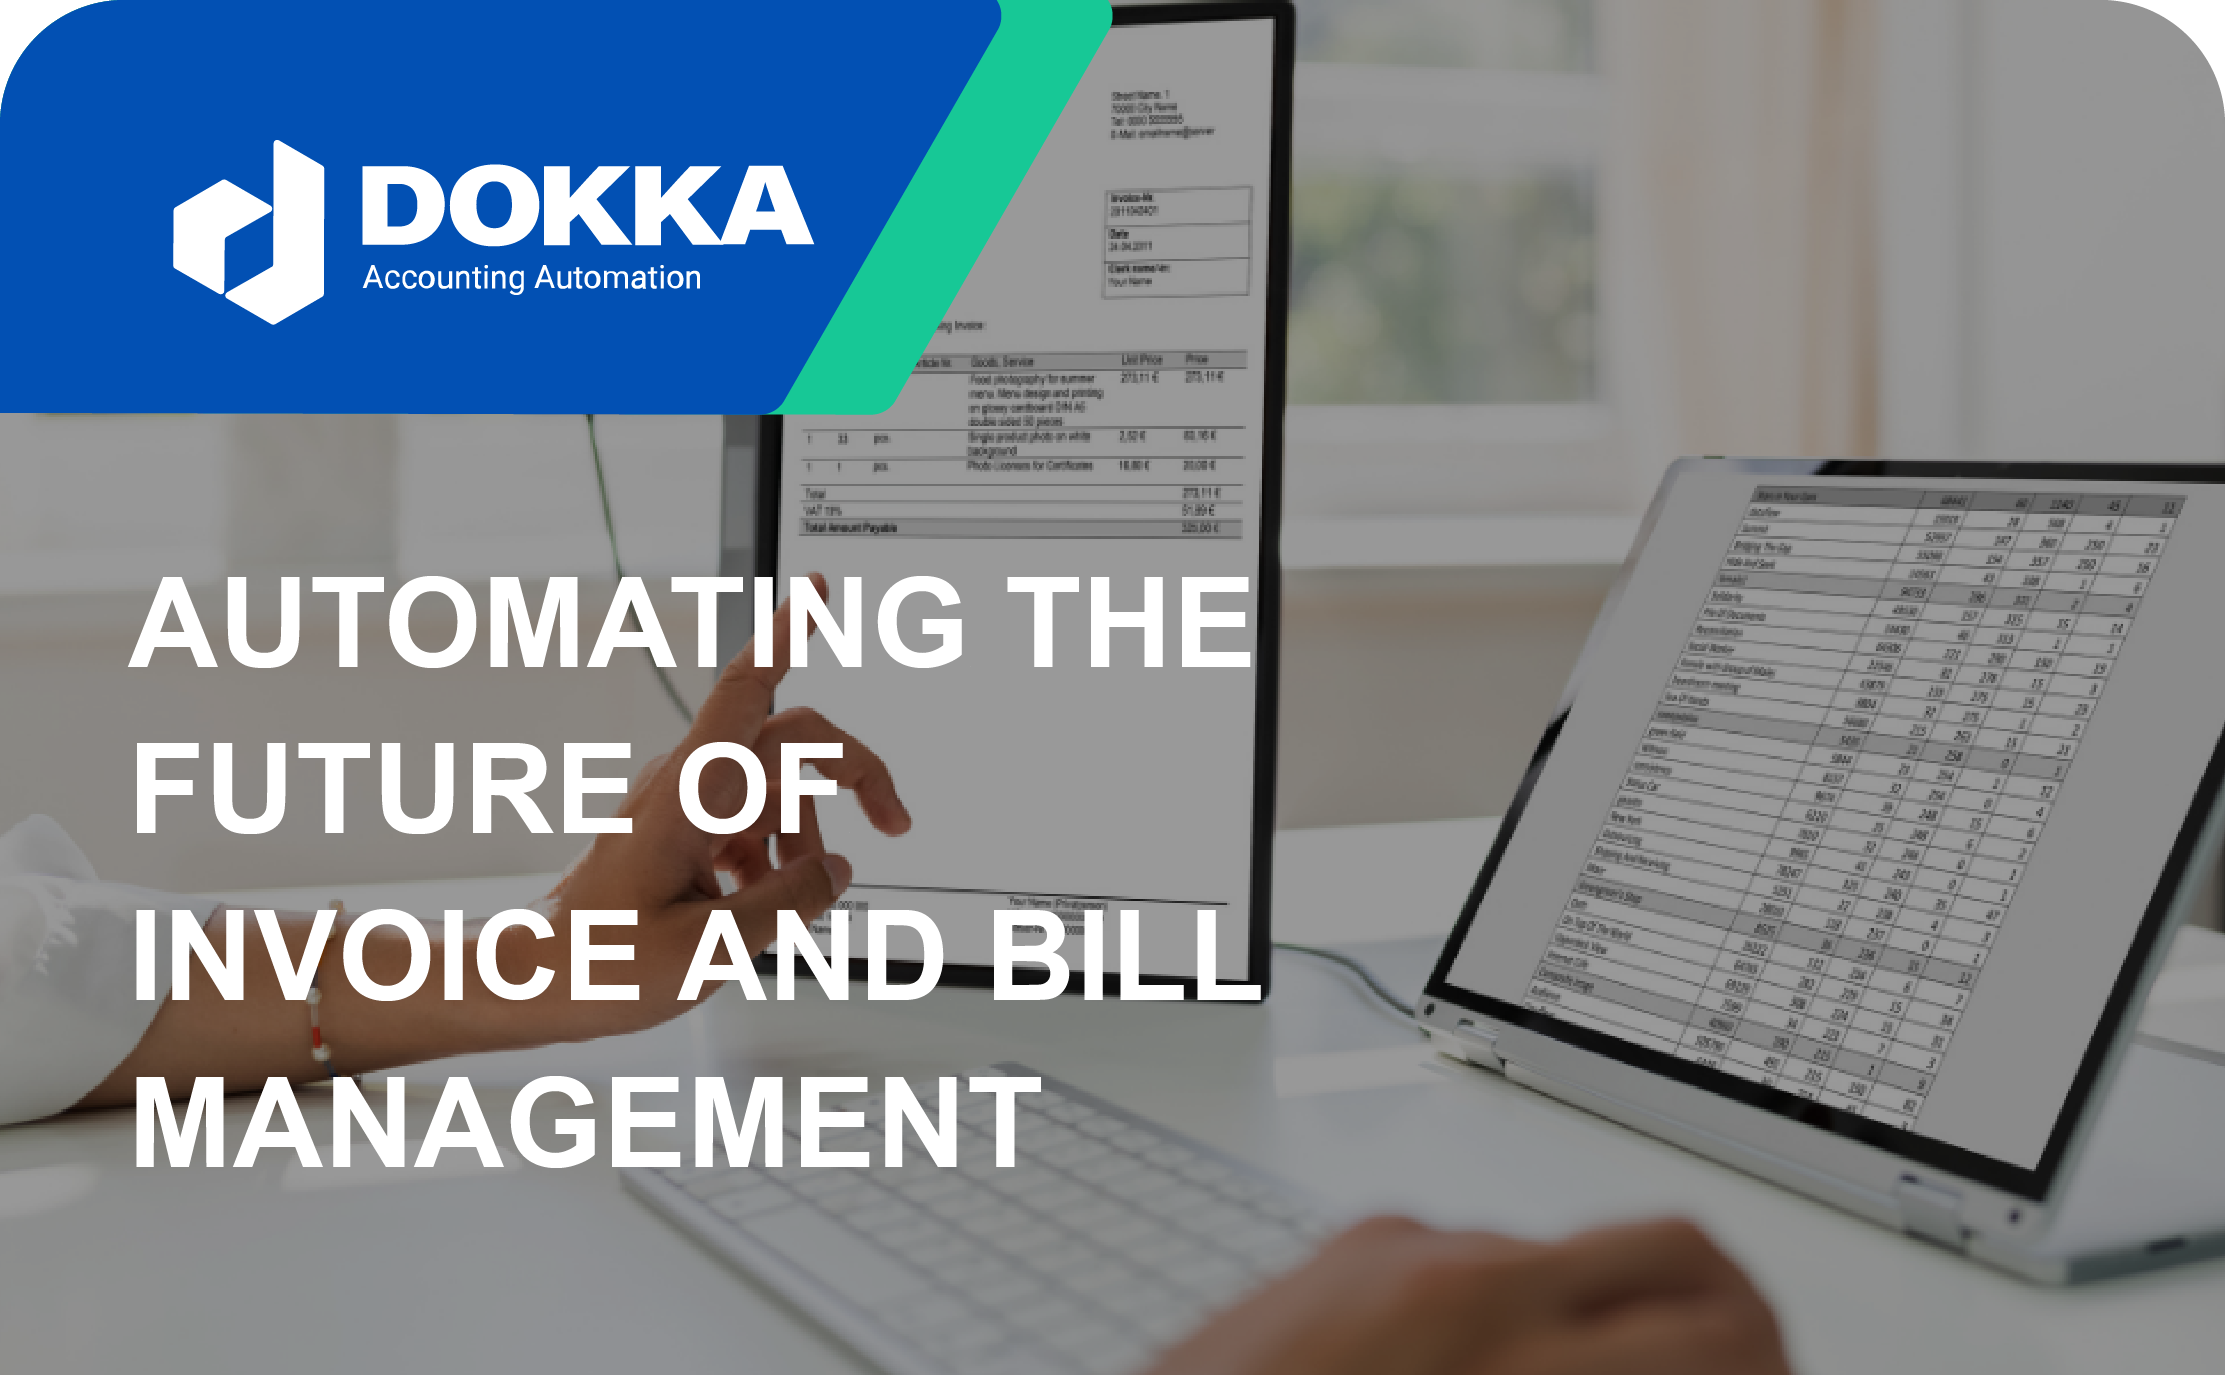 DOKKA’s AI Bookkeeping – Automating the future of invoice and bill management